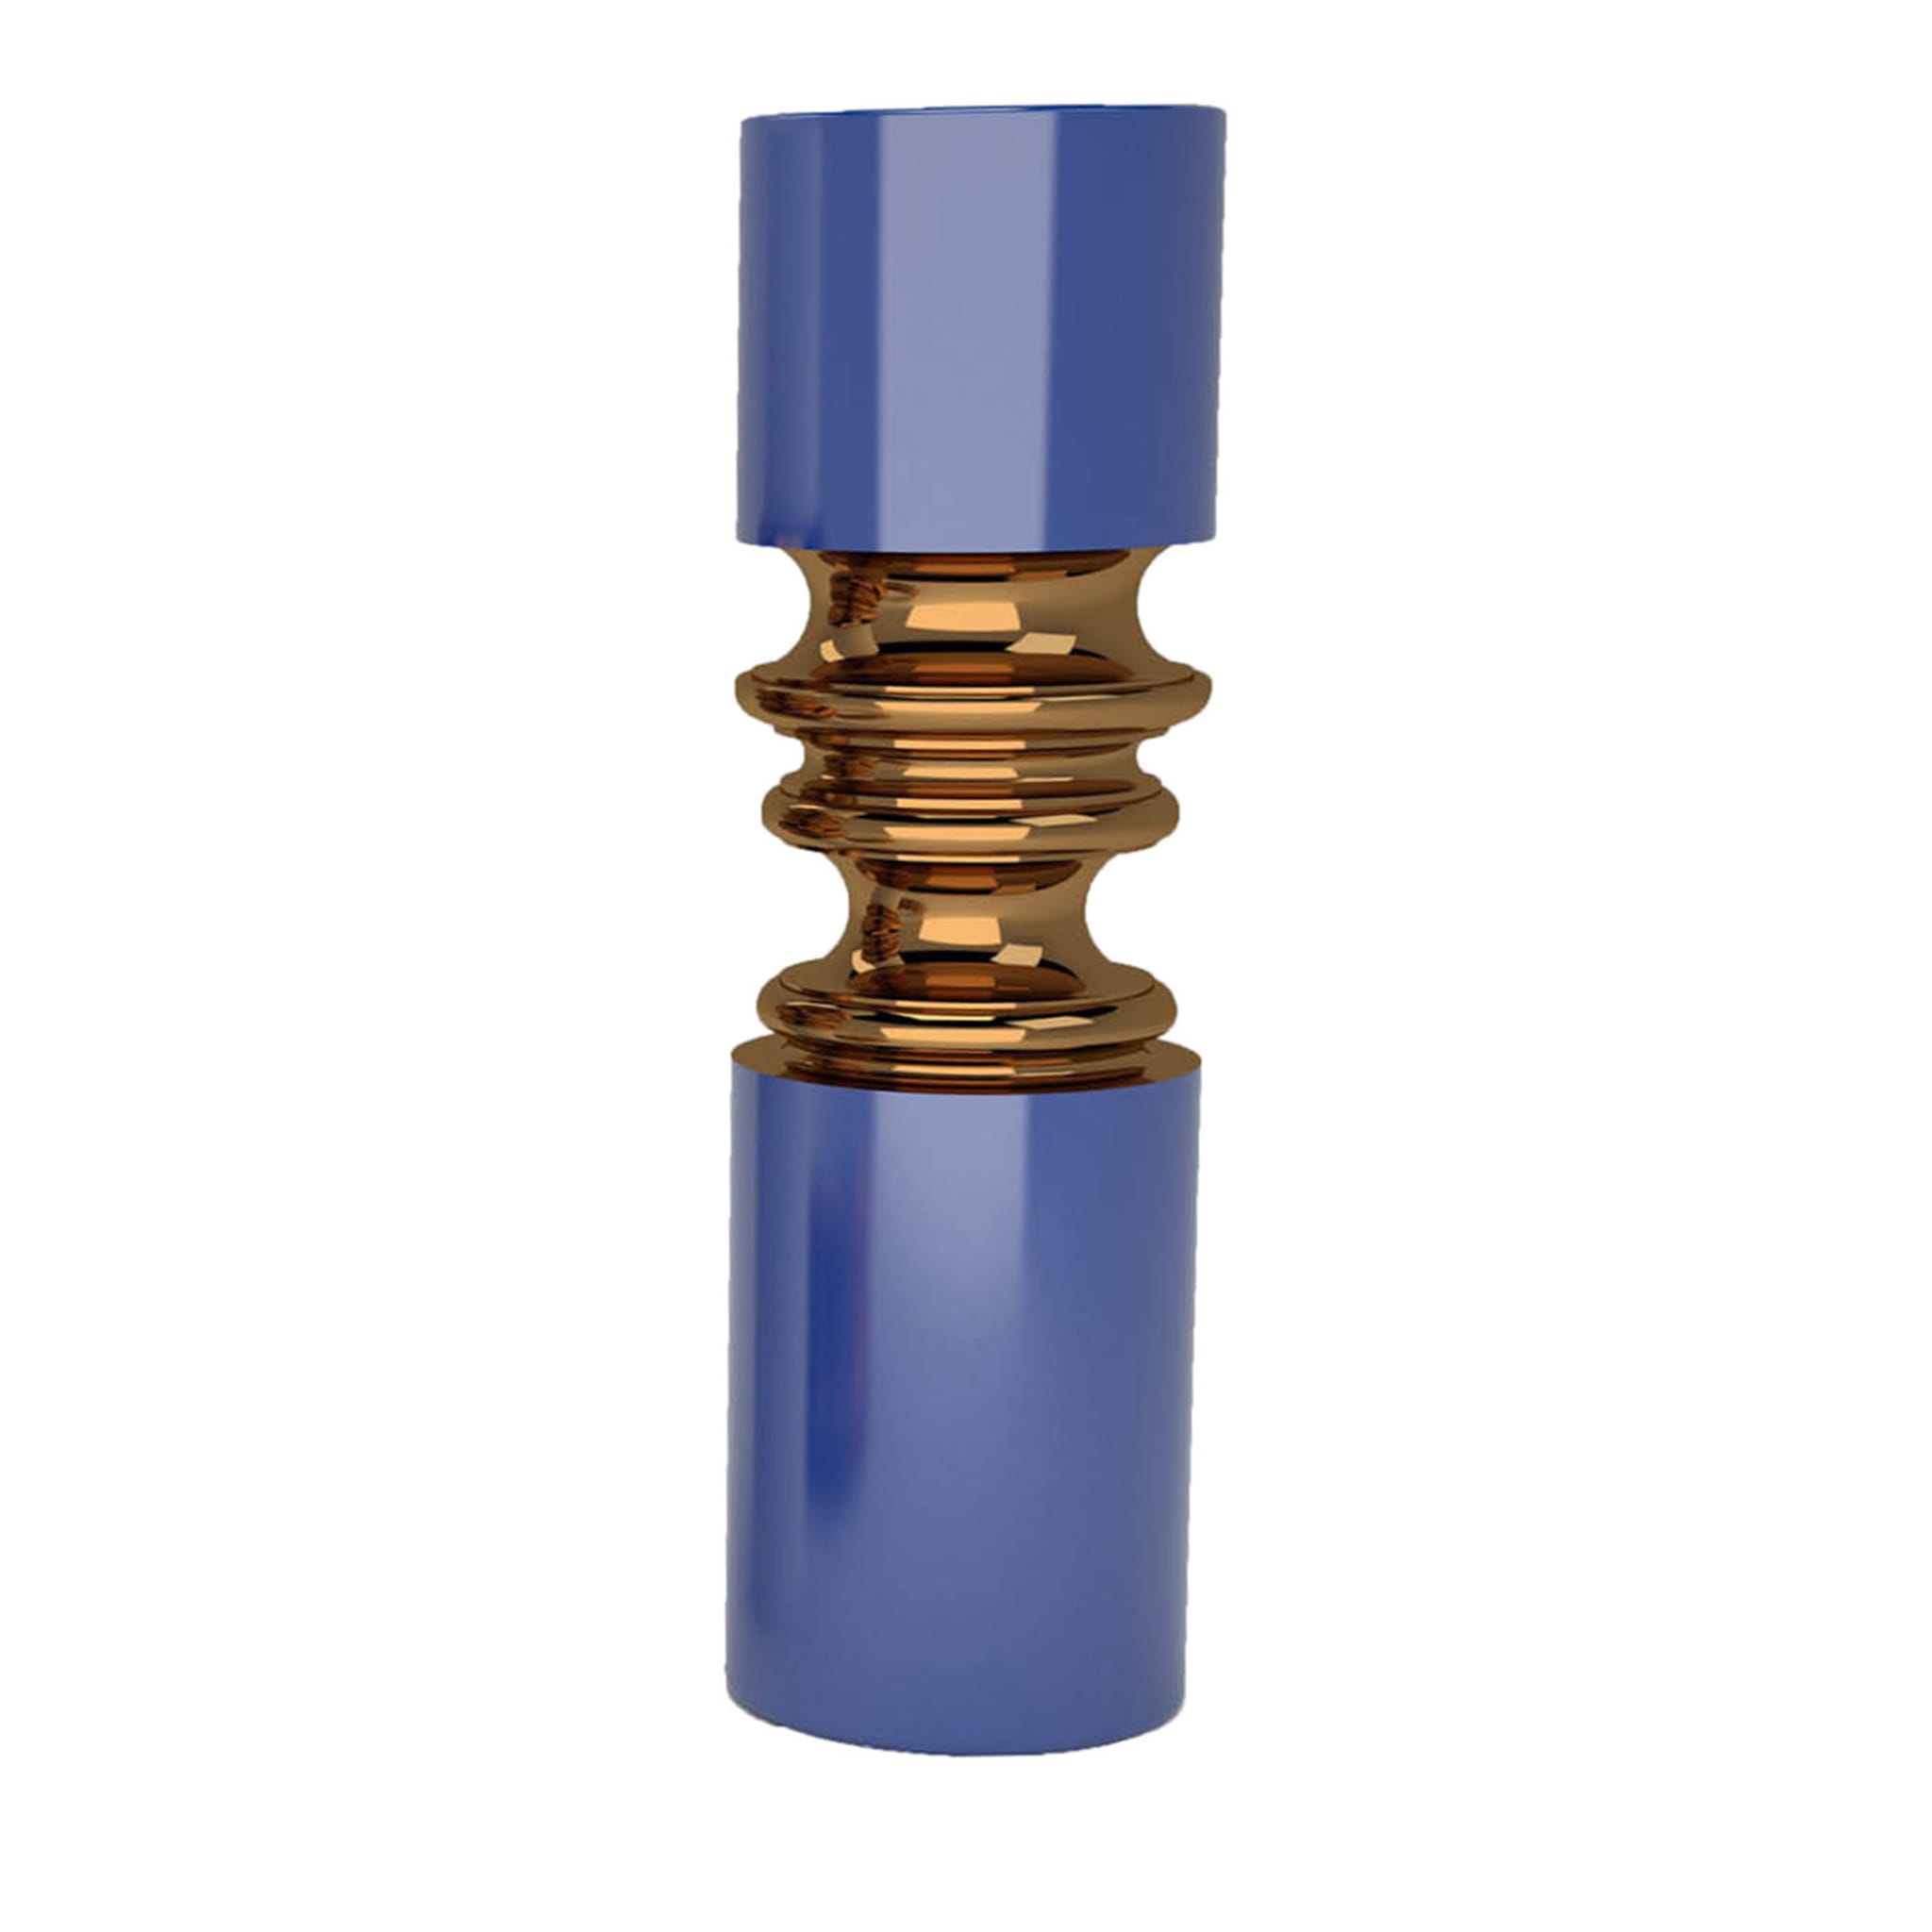 Ordini Cobalt & Bronze Vase by Analogia Project - Main view